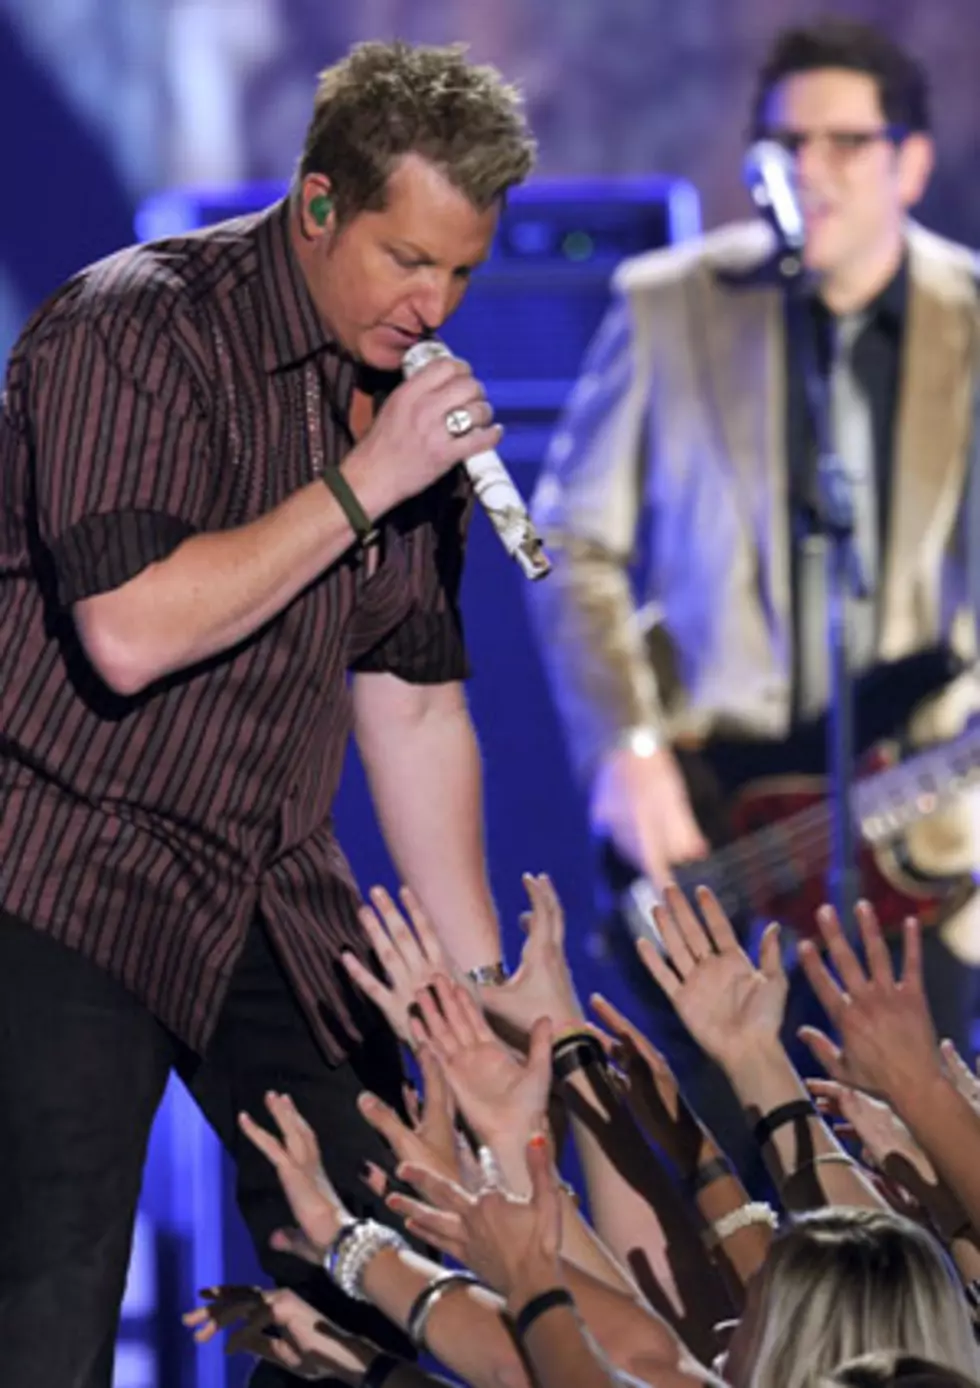 Rascal Flatts Concert to Air on ABC in March